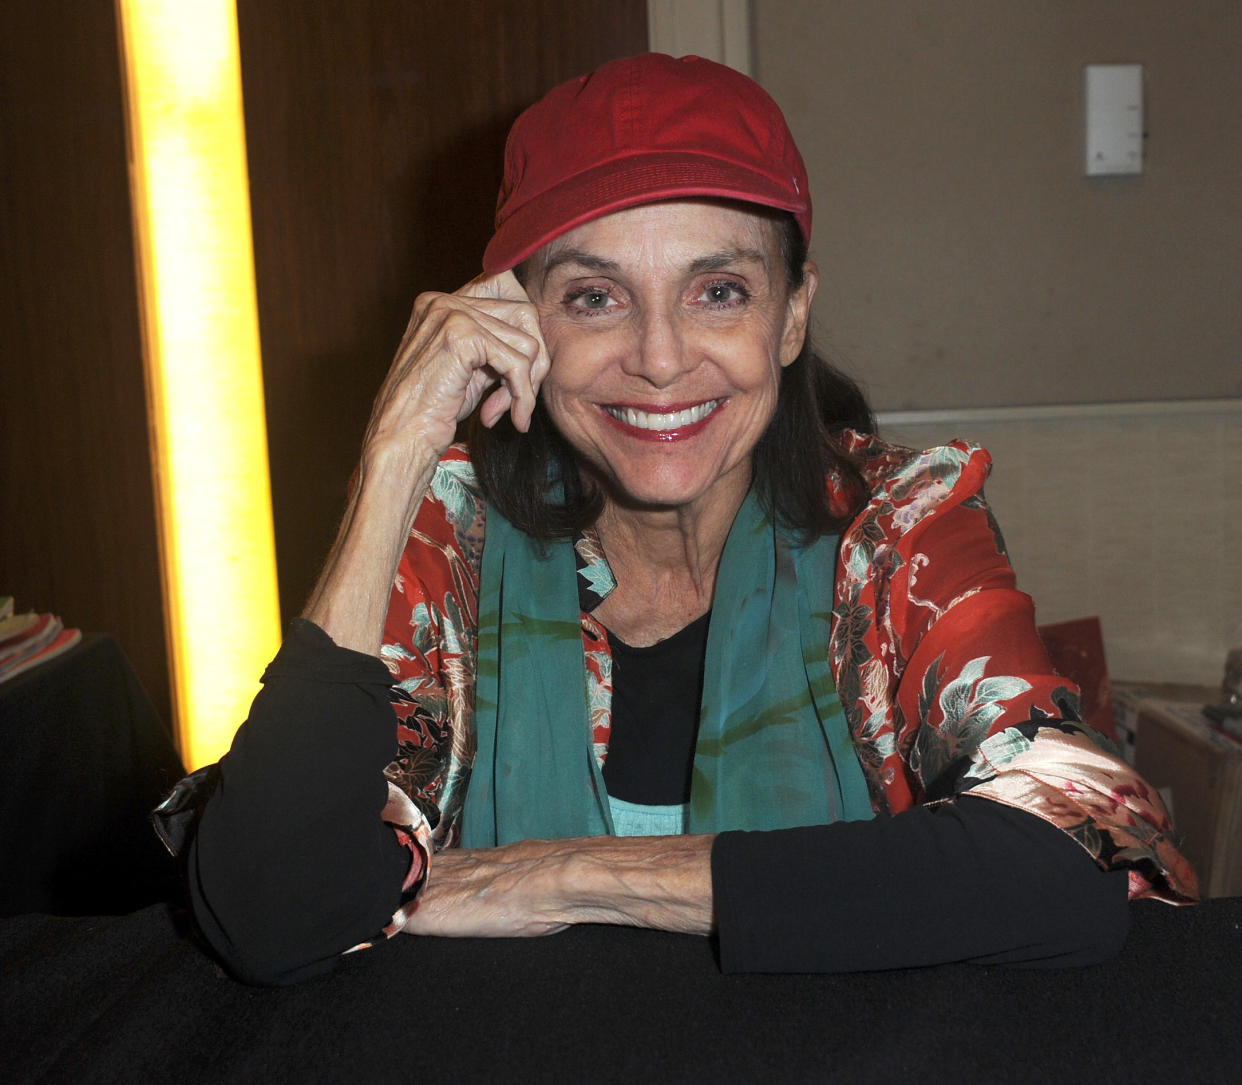 Valerie Harper at The Hollywood Show held at Westin LAX Hotel on October 21, 2017 in Los Angeles, California. (Photo: Getty Images)